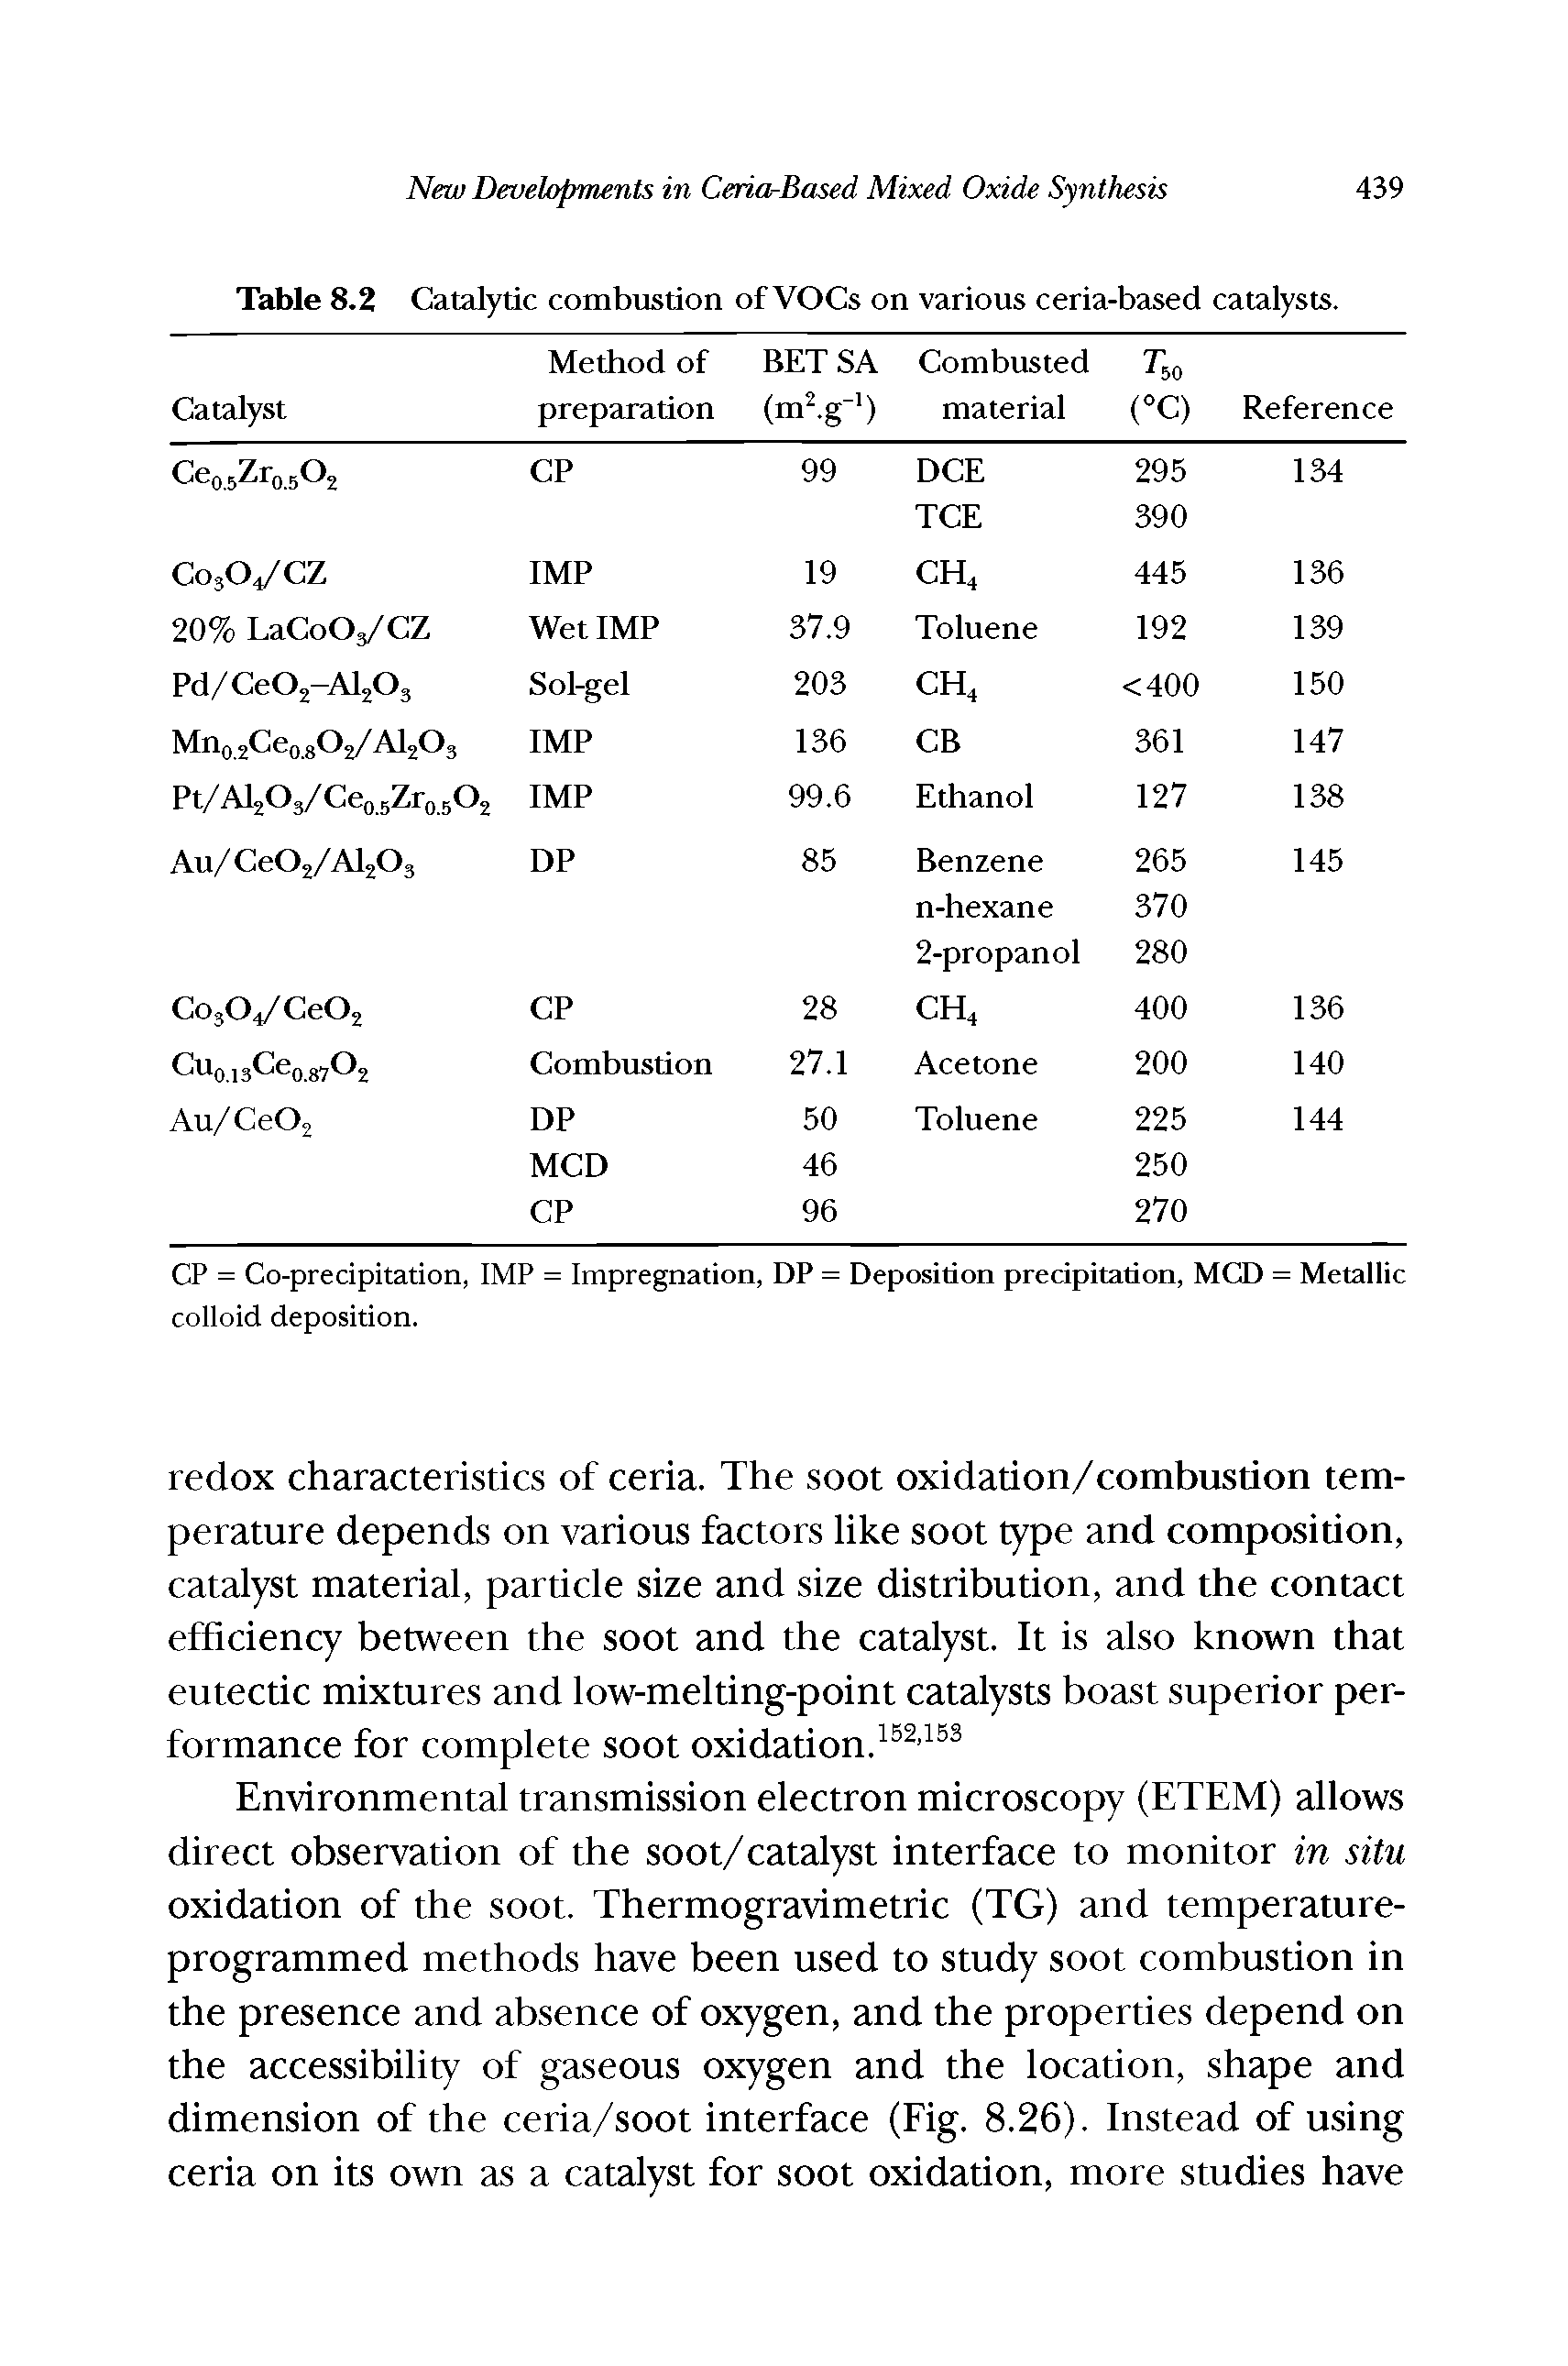 Table 8.2 Catalytic combustion of VOCs on various ceria-based catalysts.